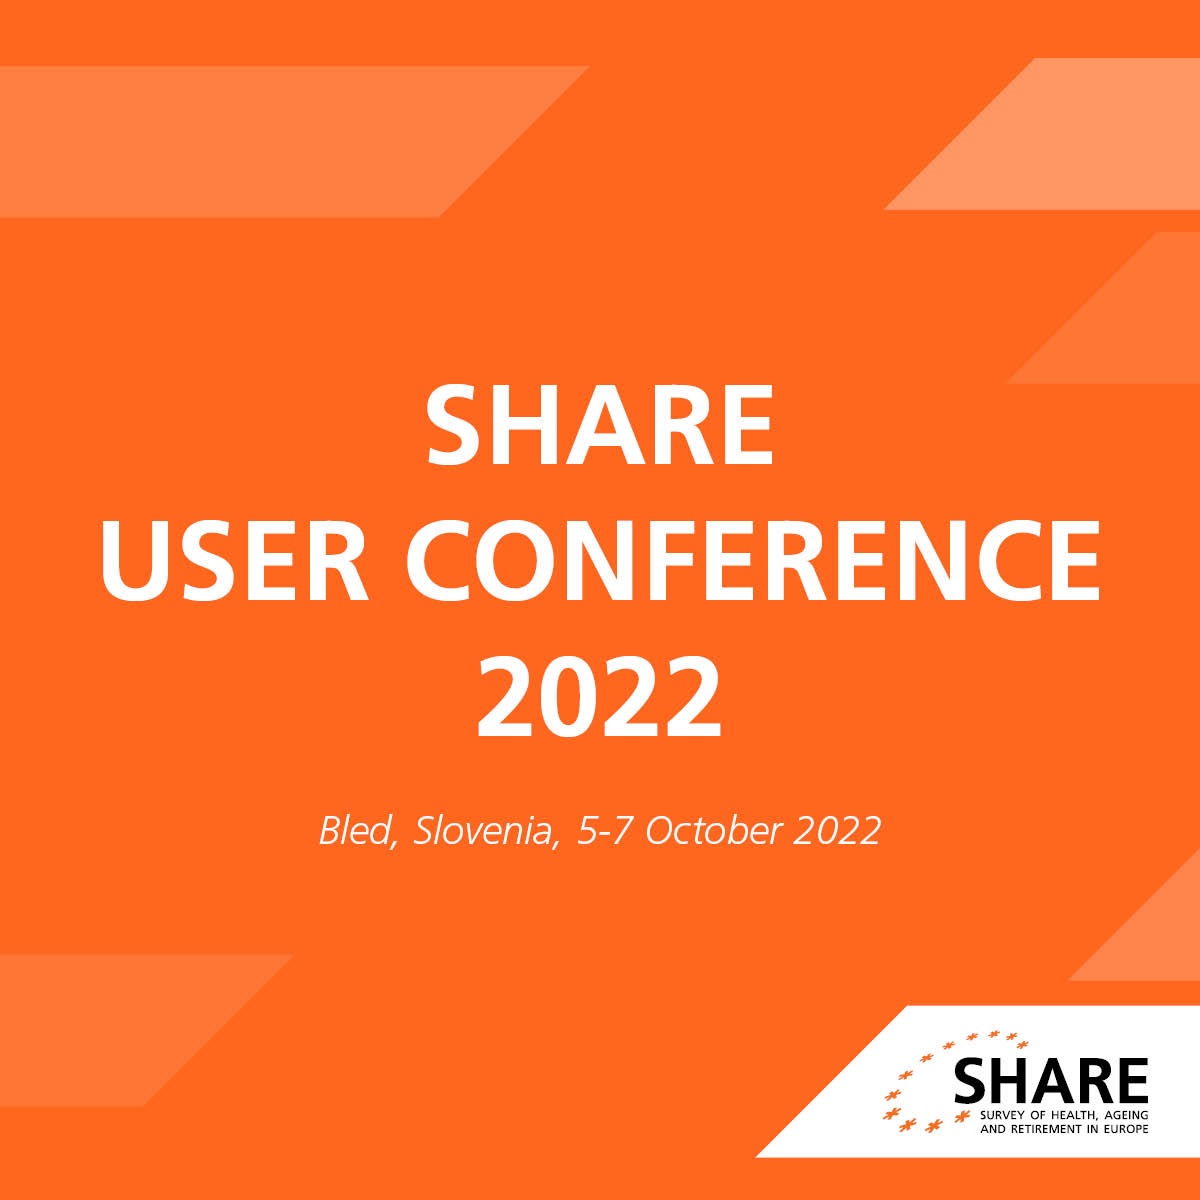 ✨The SHARE User Conference in #Bled, #Slovenia, is just around the corner! The conference theme is #AgeingSocieties Facing #Health, #Social and #Economic Crises. There are a few places left – register now! (Registration open until Wed, Sept 28th) shareuser2022.si